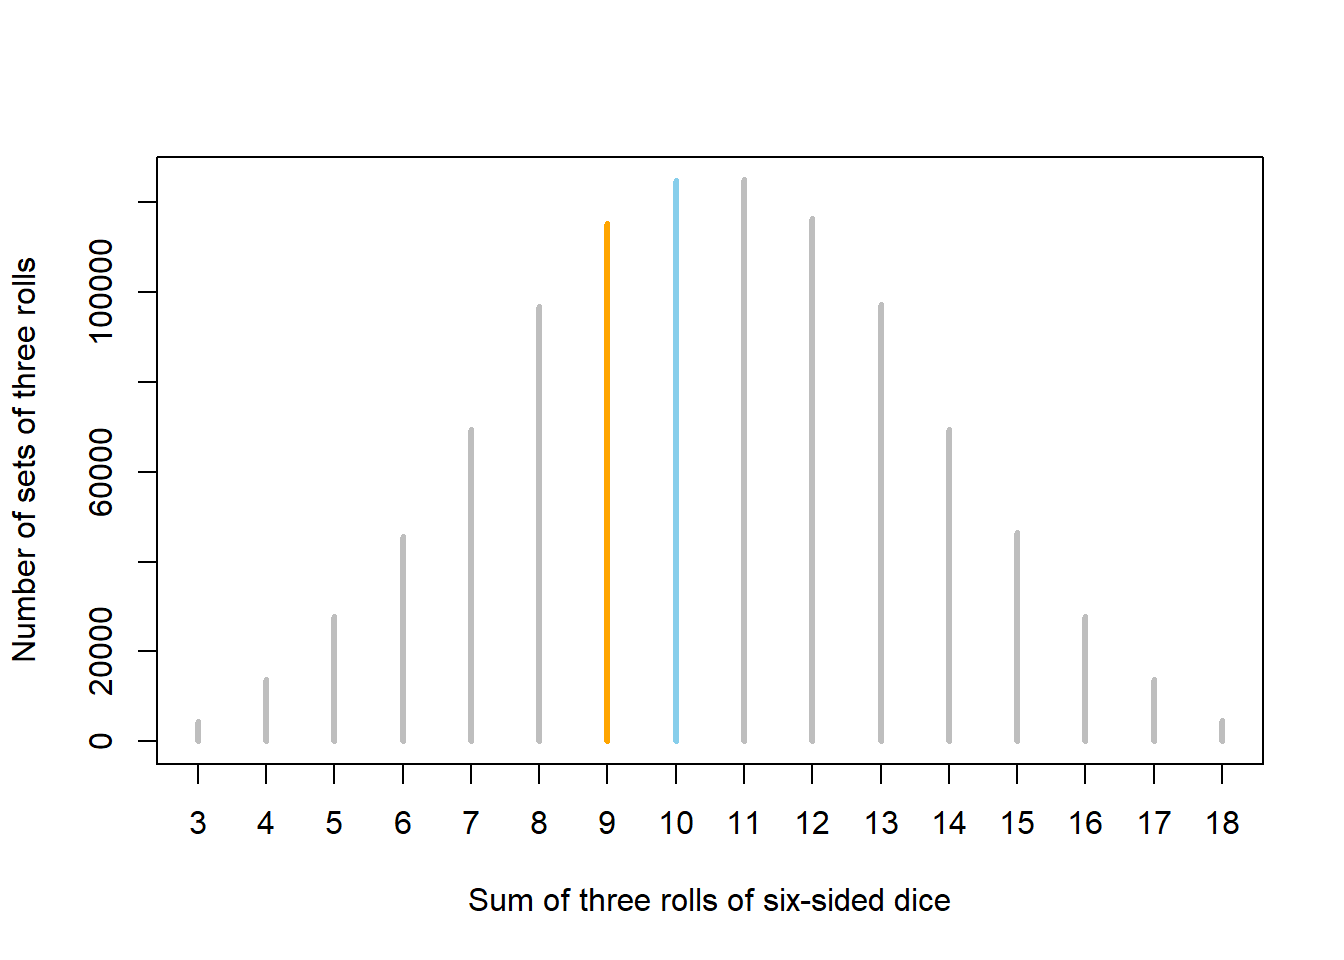 Results of one million sets of three rolls of fair six-sided dice. Sets in which the sum of the dice is 9 (10) are represented by orange (blue) spike.